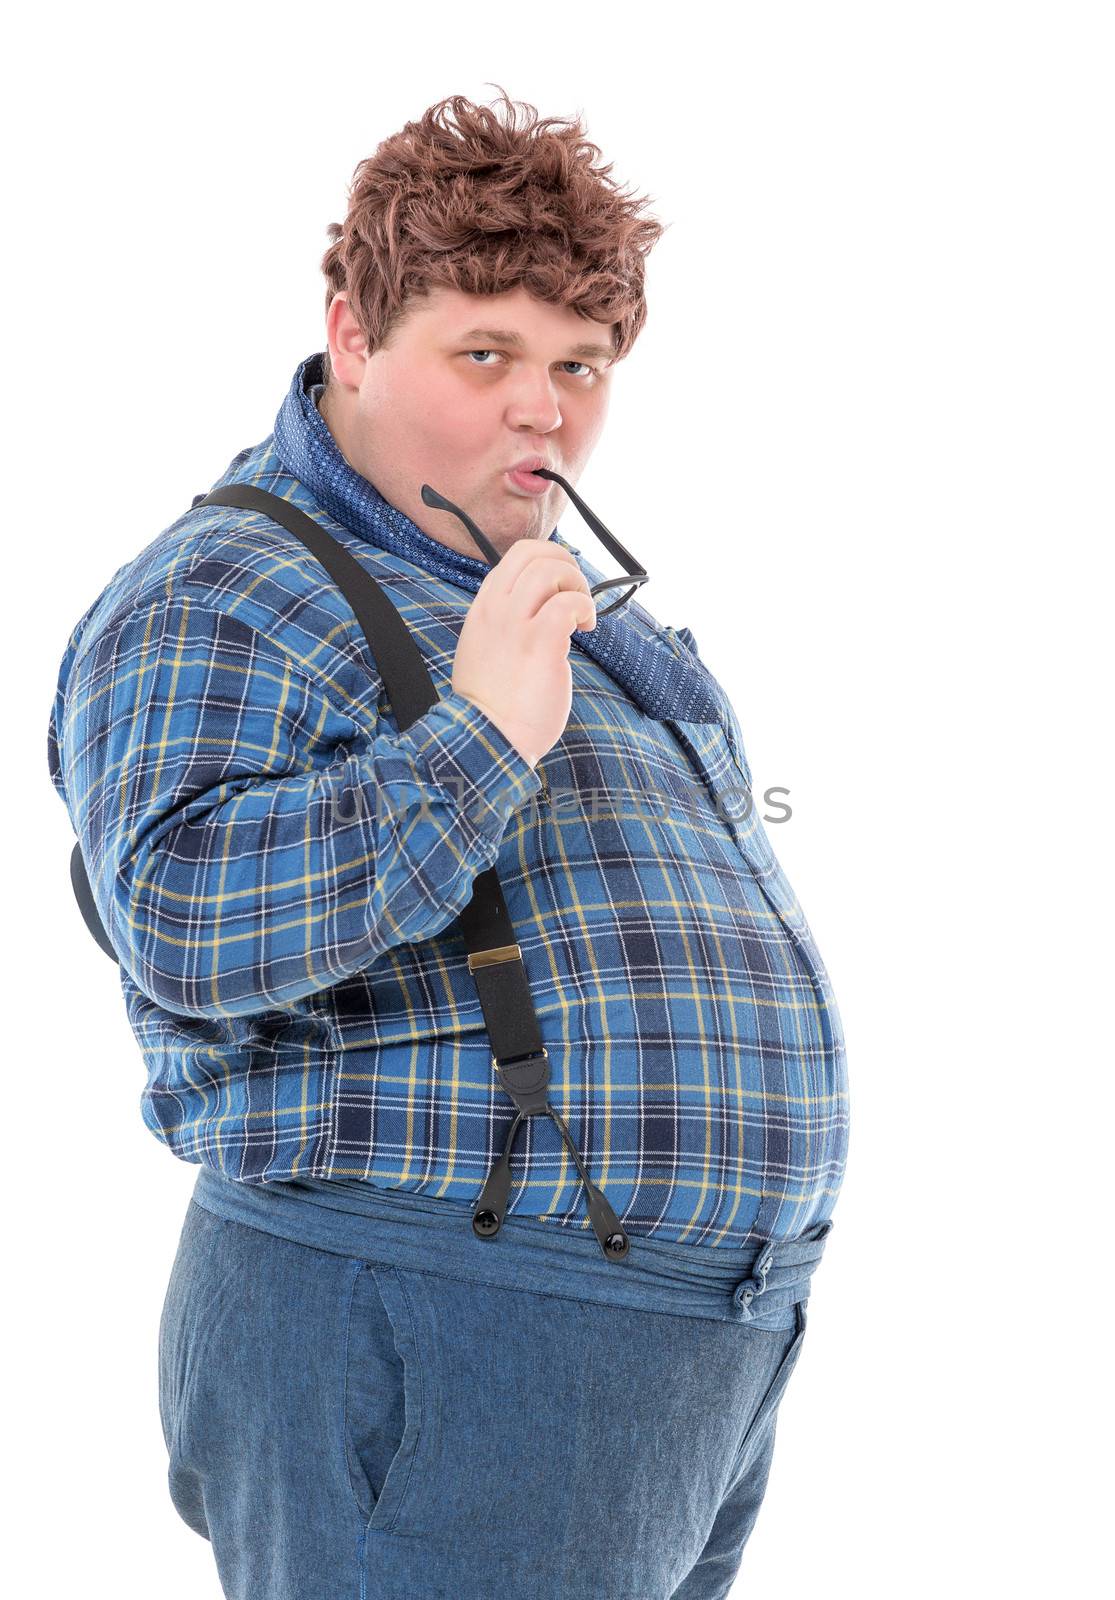 Overweight obese young man by Discovod